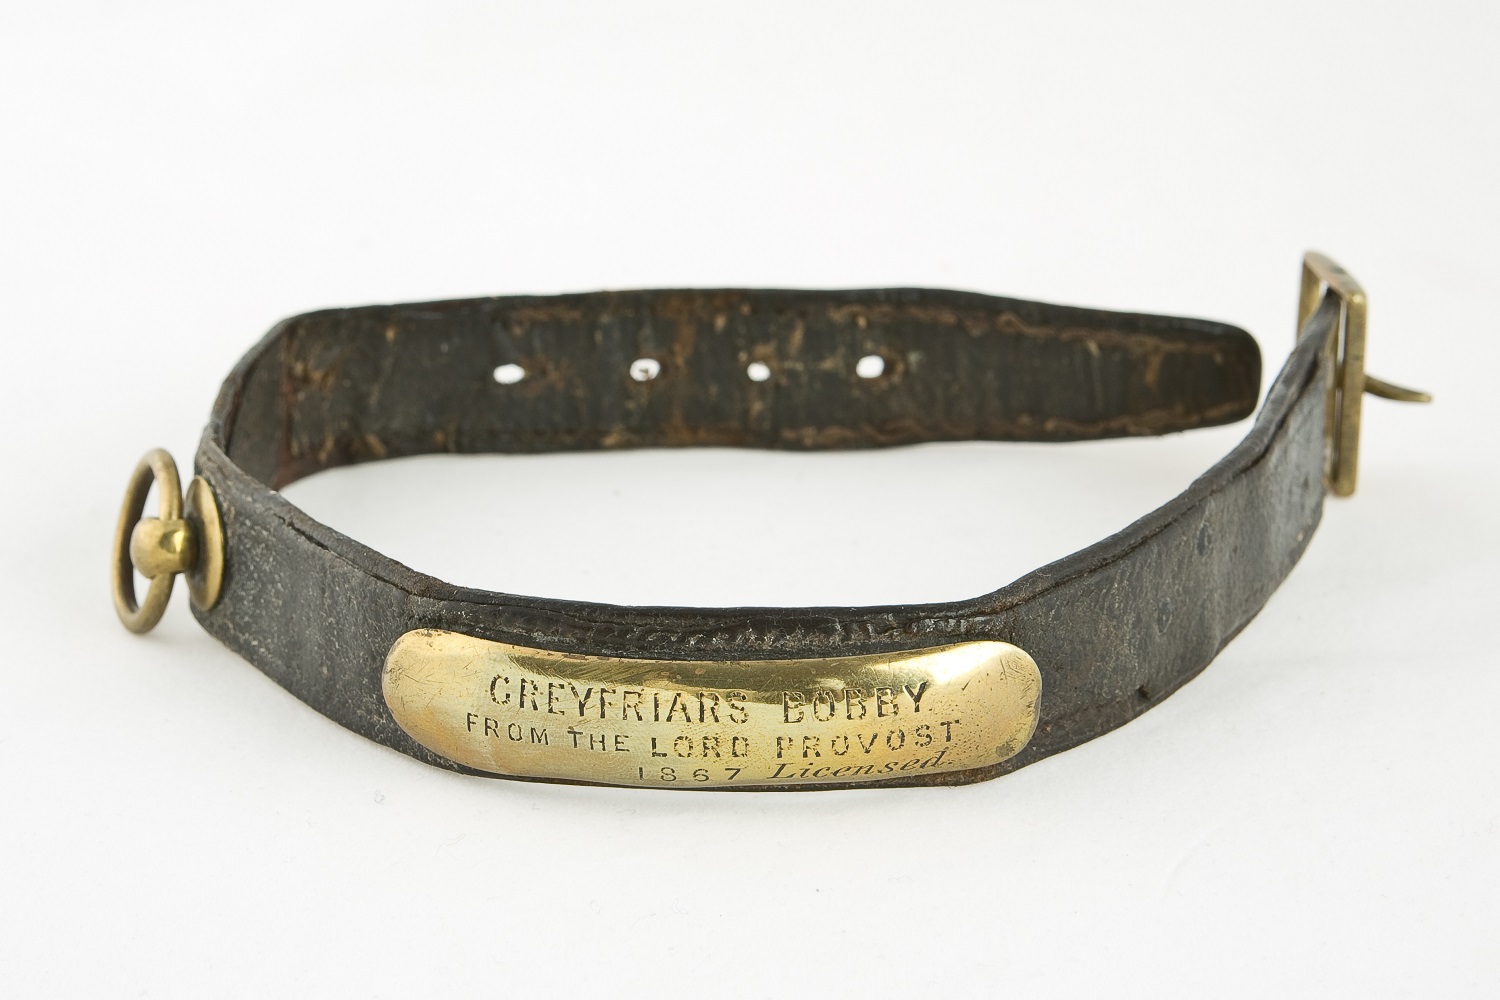 Greyfriars Bobby's collar with label inscribed with his name